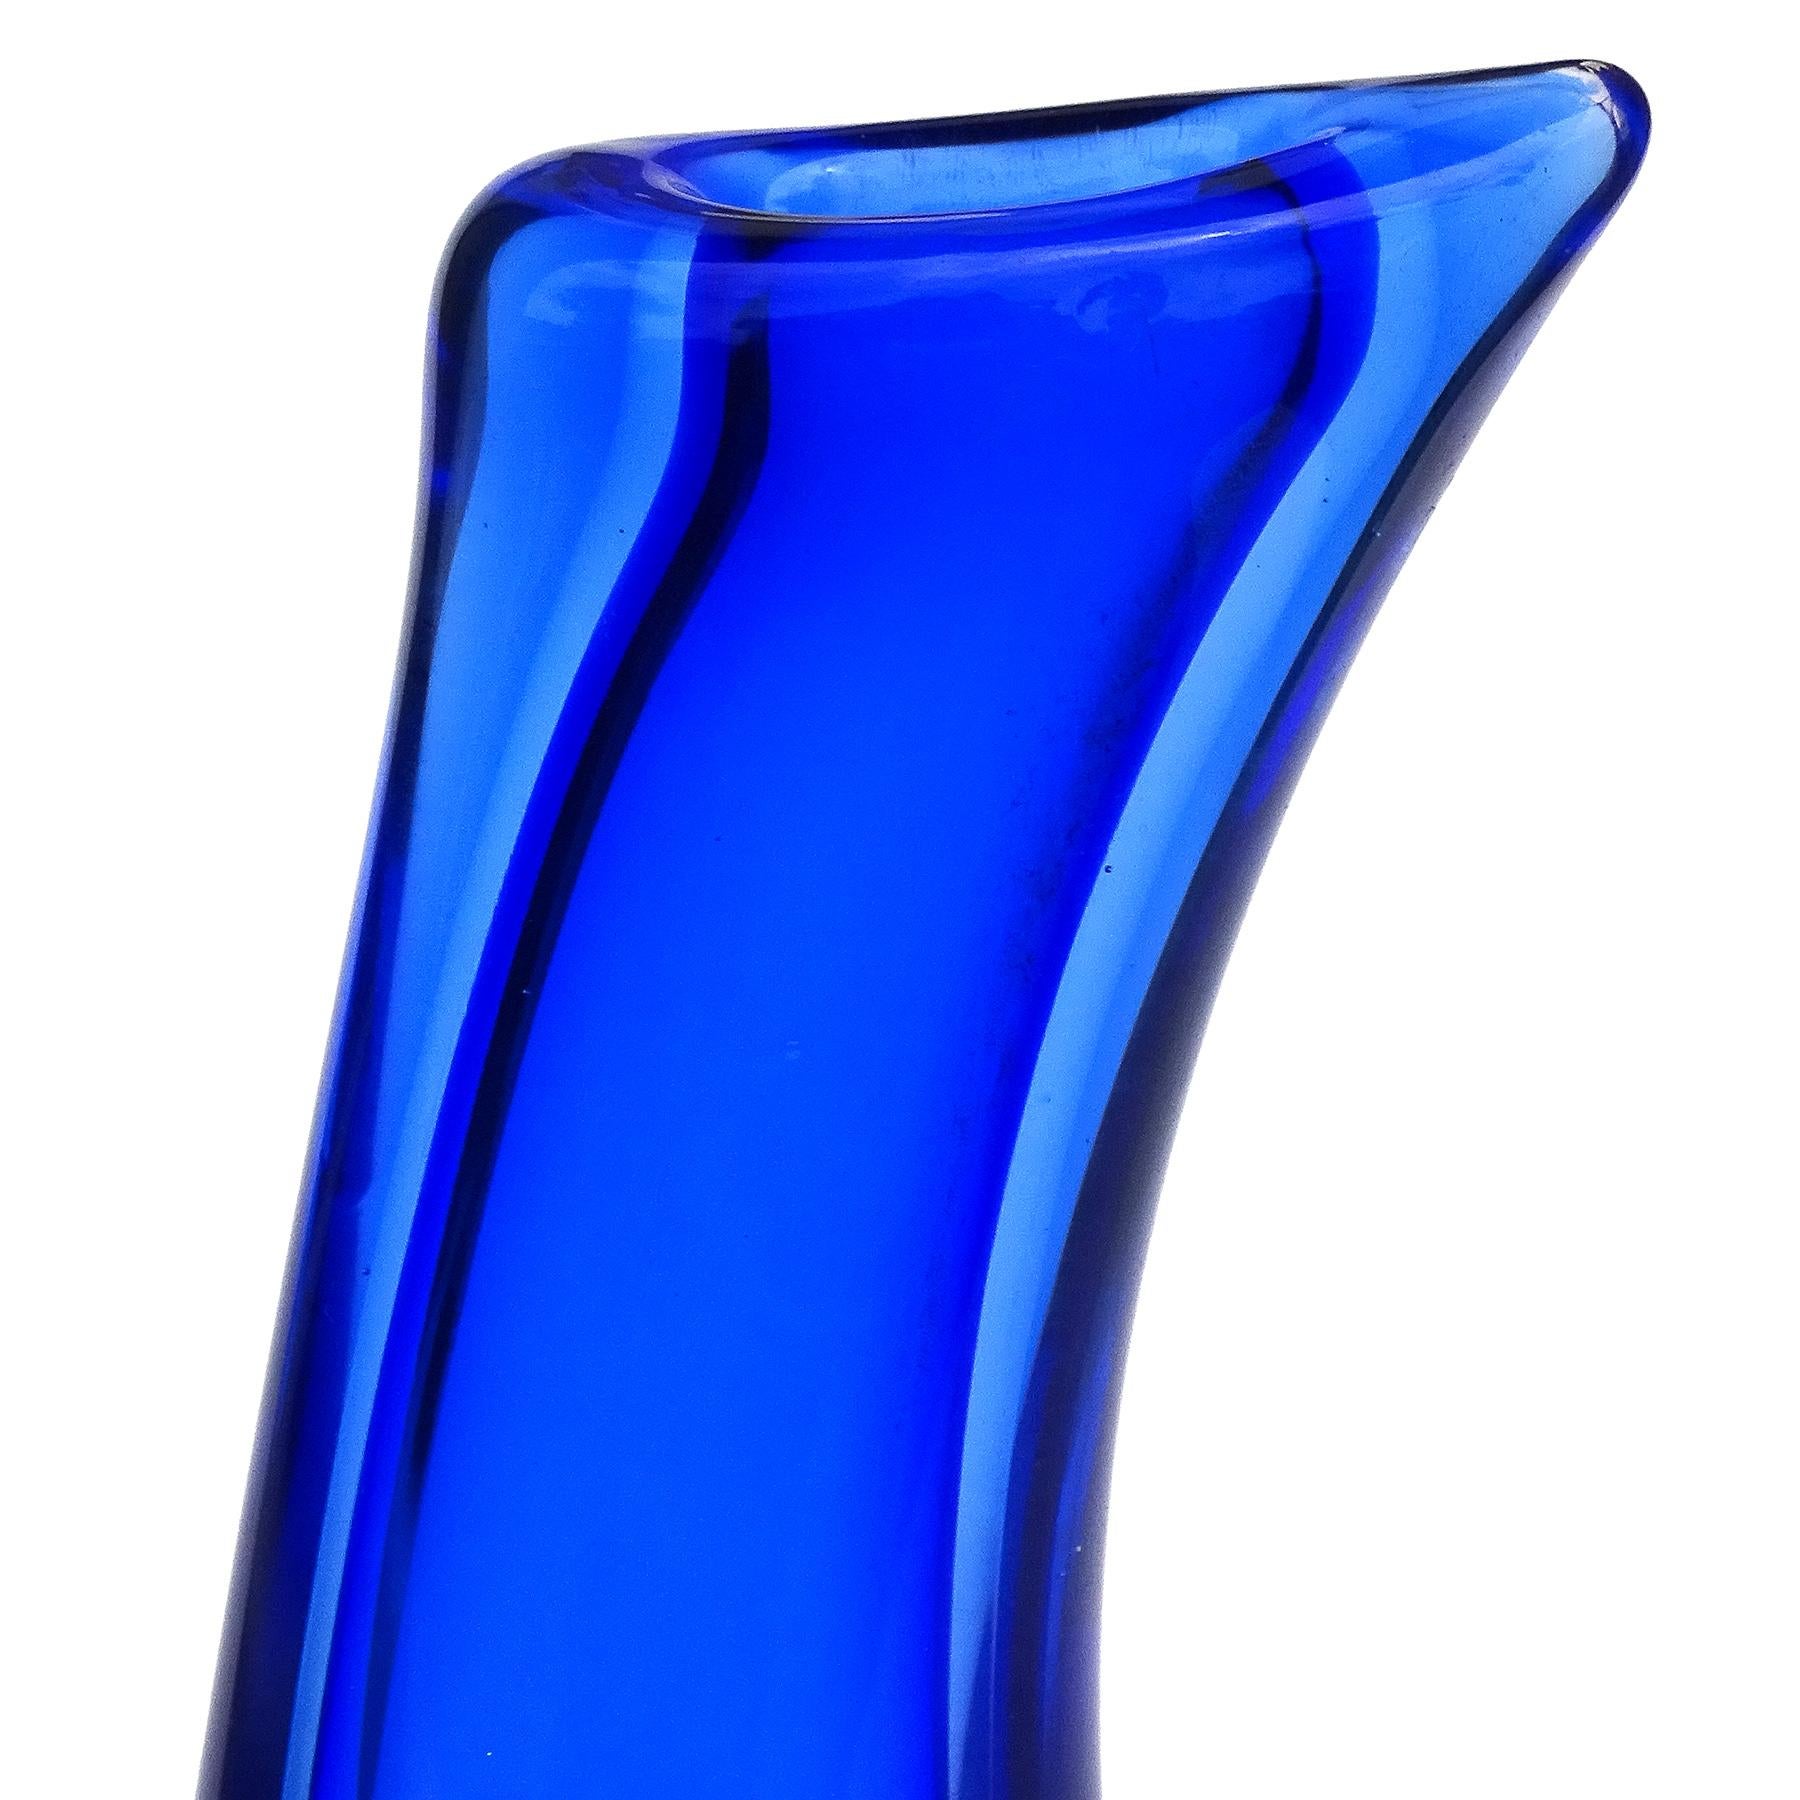 Beautiful vintage Murano hand blown Sommerso cobalt blue Italian art glass decorative sculptural flower vase. The inner blue layer looks like it fades out from the middle towards the edges. The vase also has 2 pulled glass points on the side, and